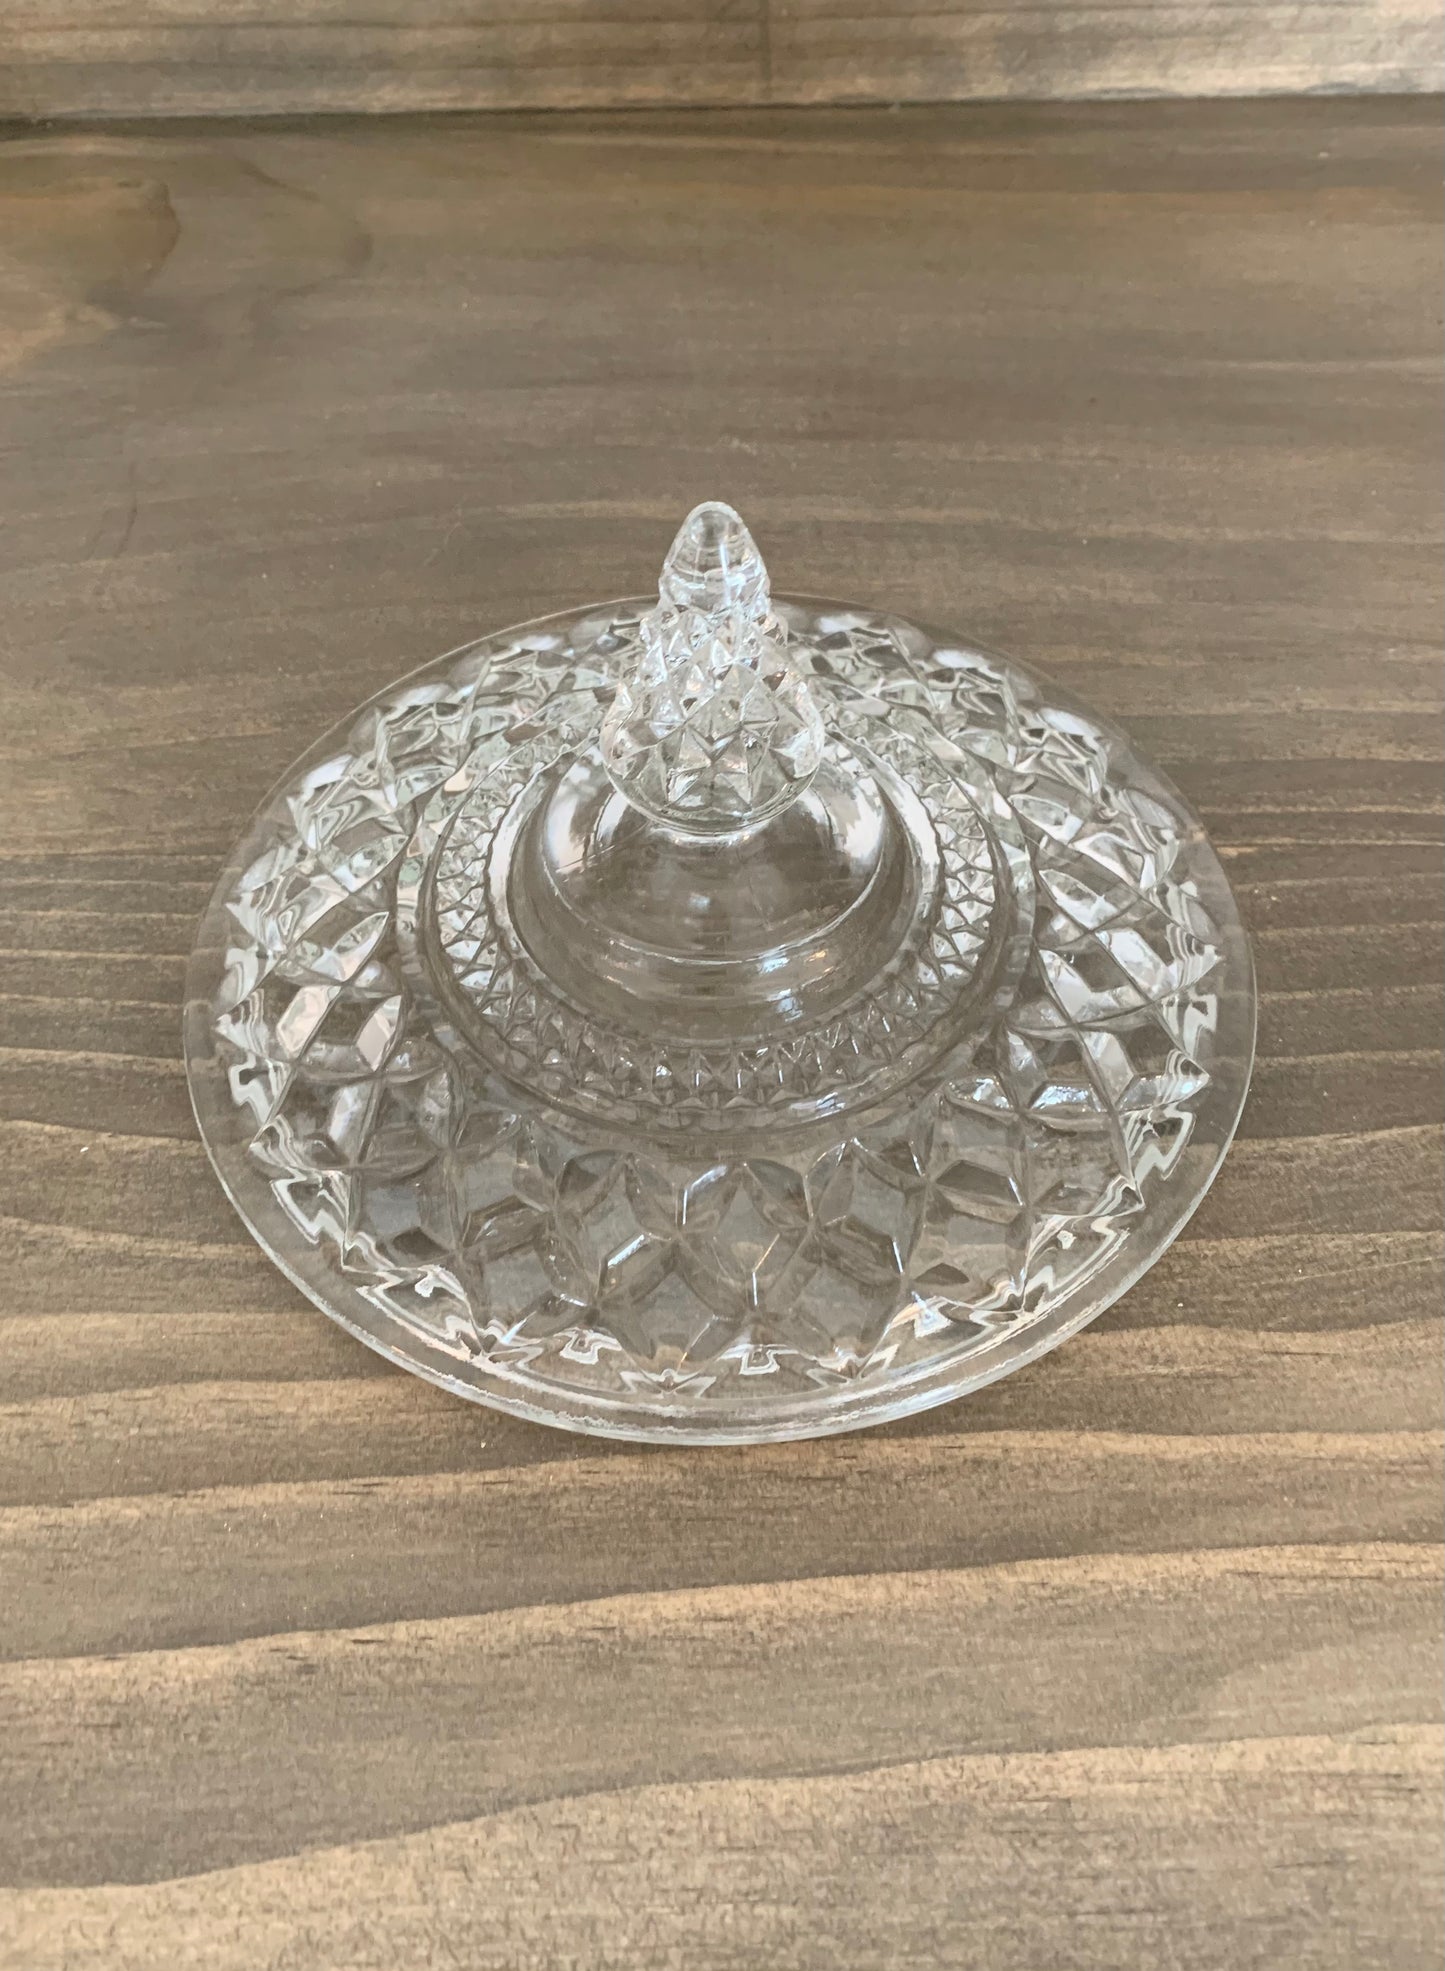 Vintage Anchor Hocking "Wexford" Lidded Pressed Glass Candy Dish